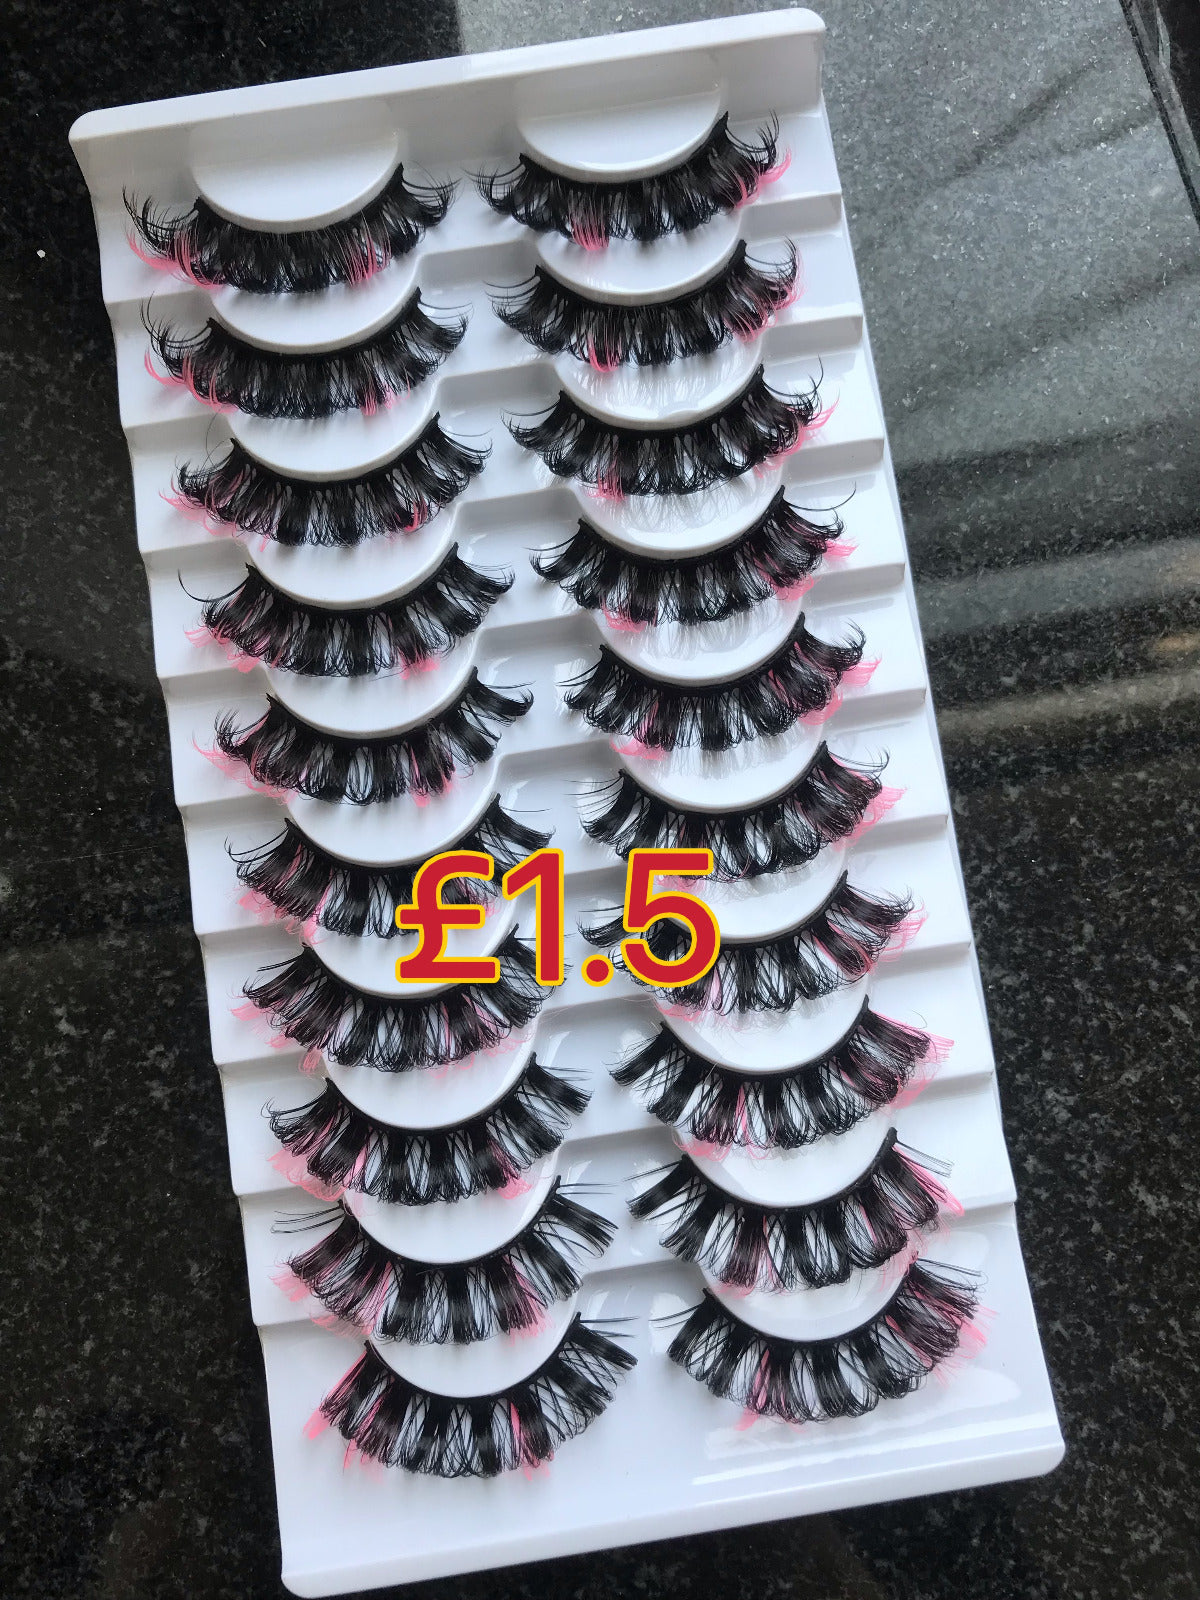 6 packs of lashes